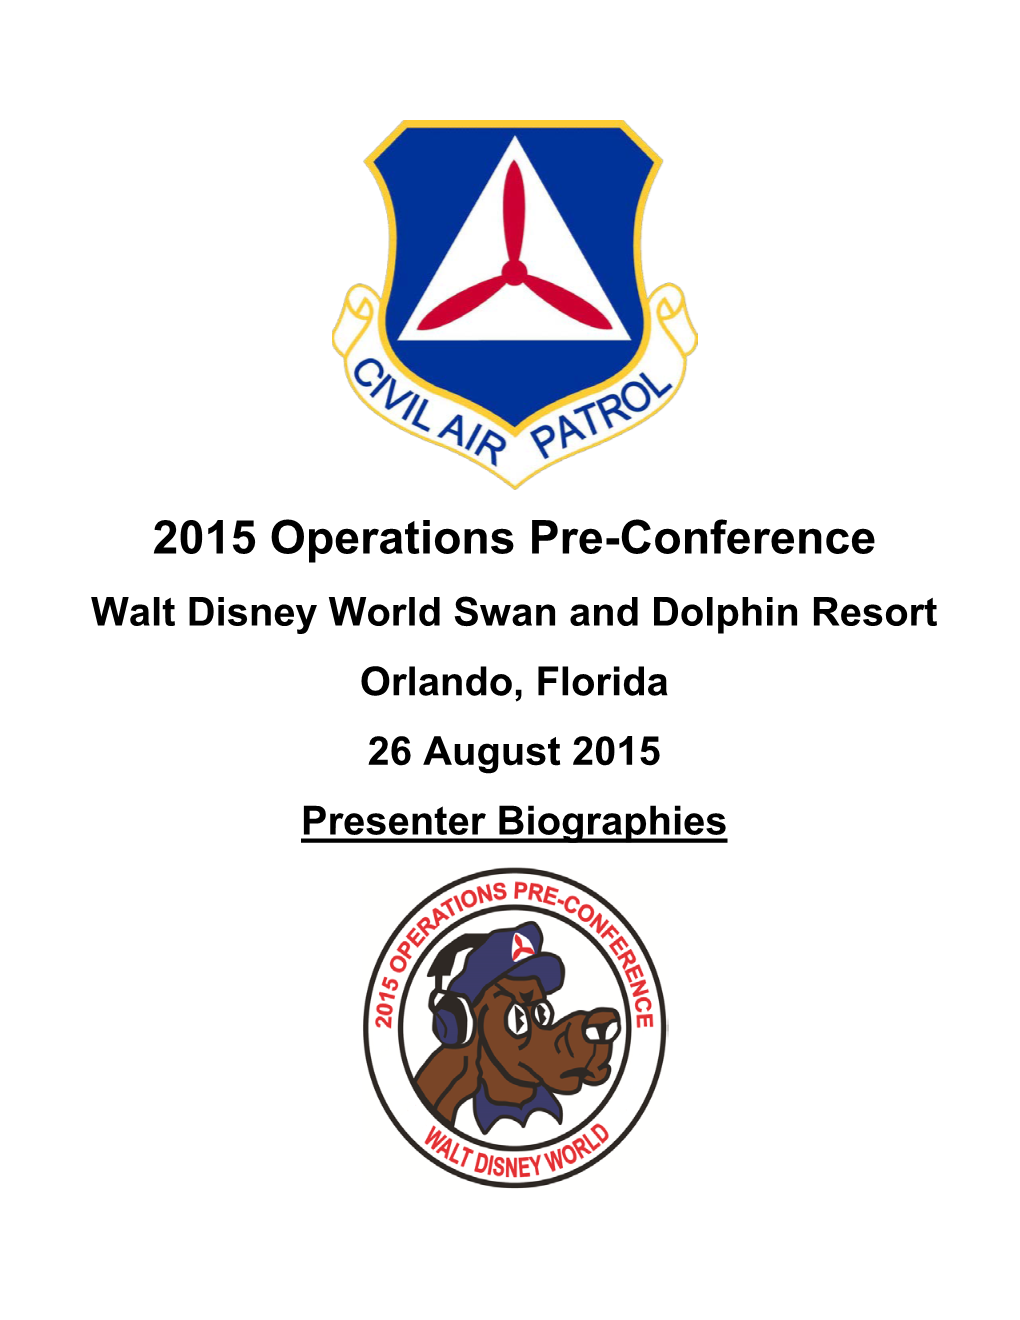 2015 Operations Pre-Conference Walt Disney World Swan and Dolphin Resort Orlando, Florida 26 August 2015 Presenter Biographies